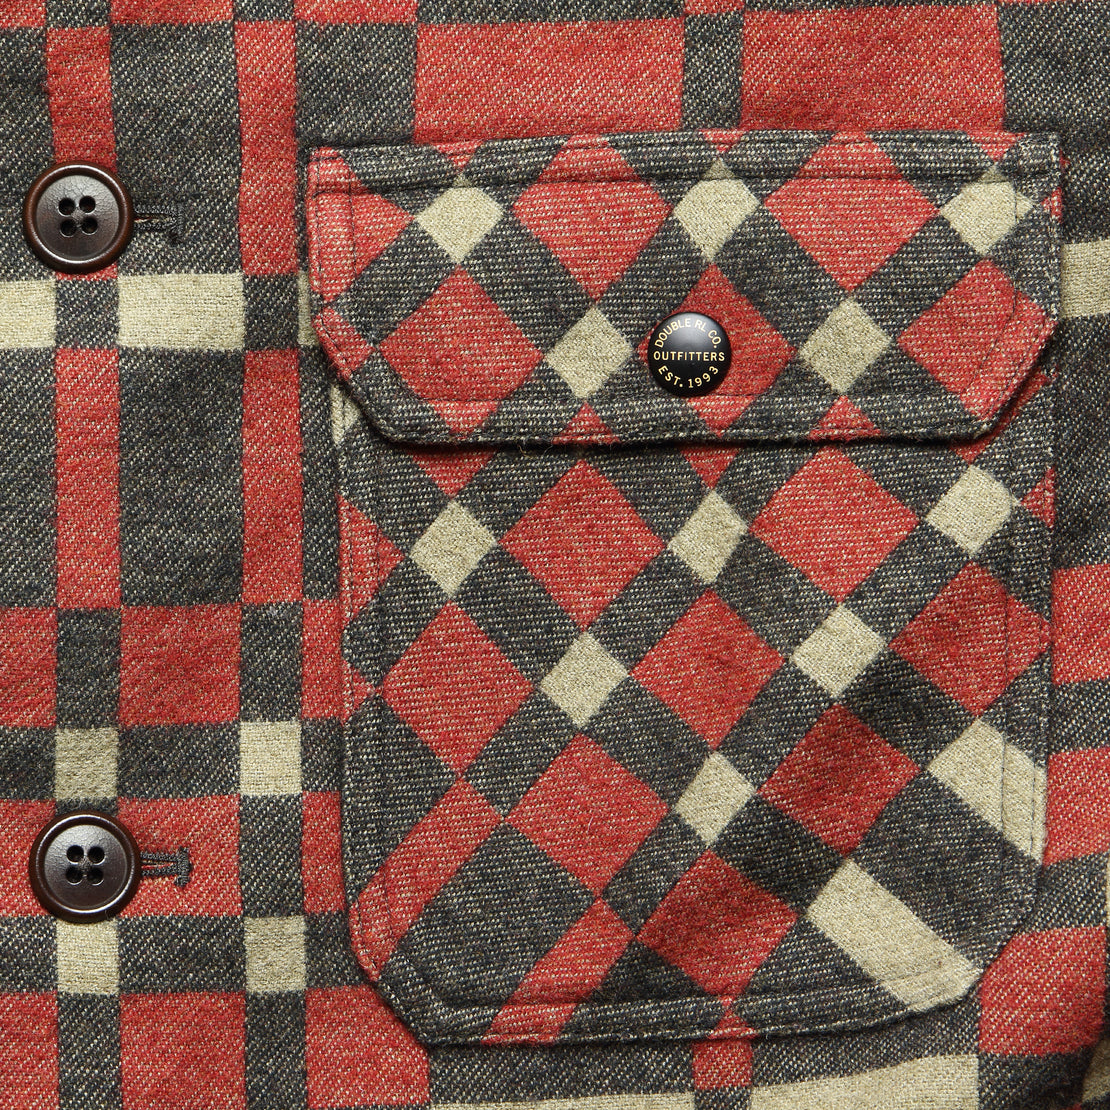 Juno Jacquard Overshirt - Red/Black - RRL - STAG Provisions - Tops - L/S Woven - Overshirt